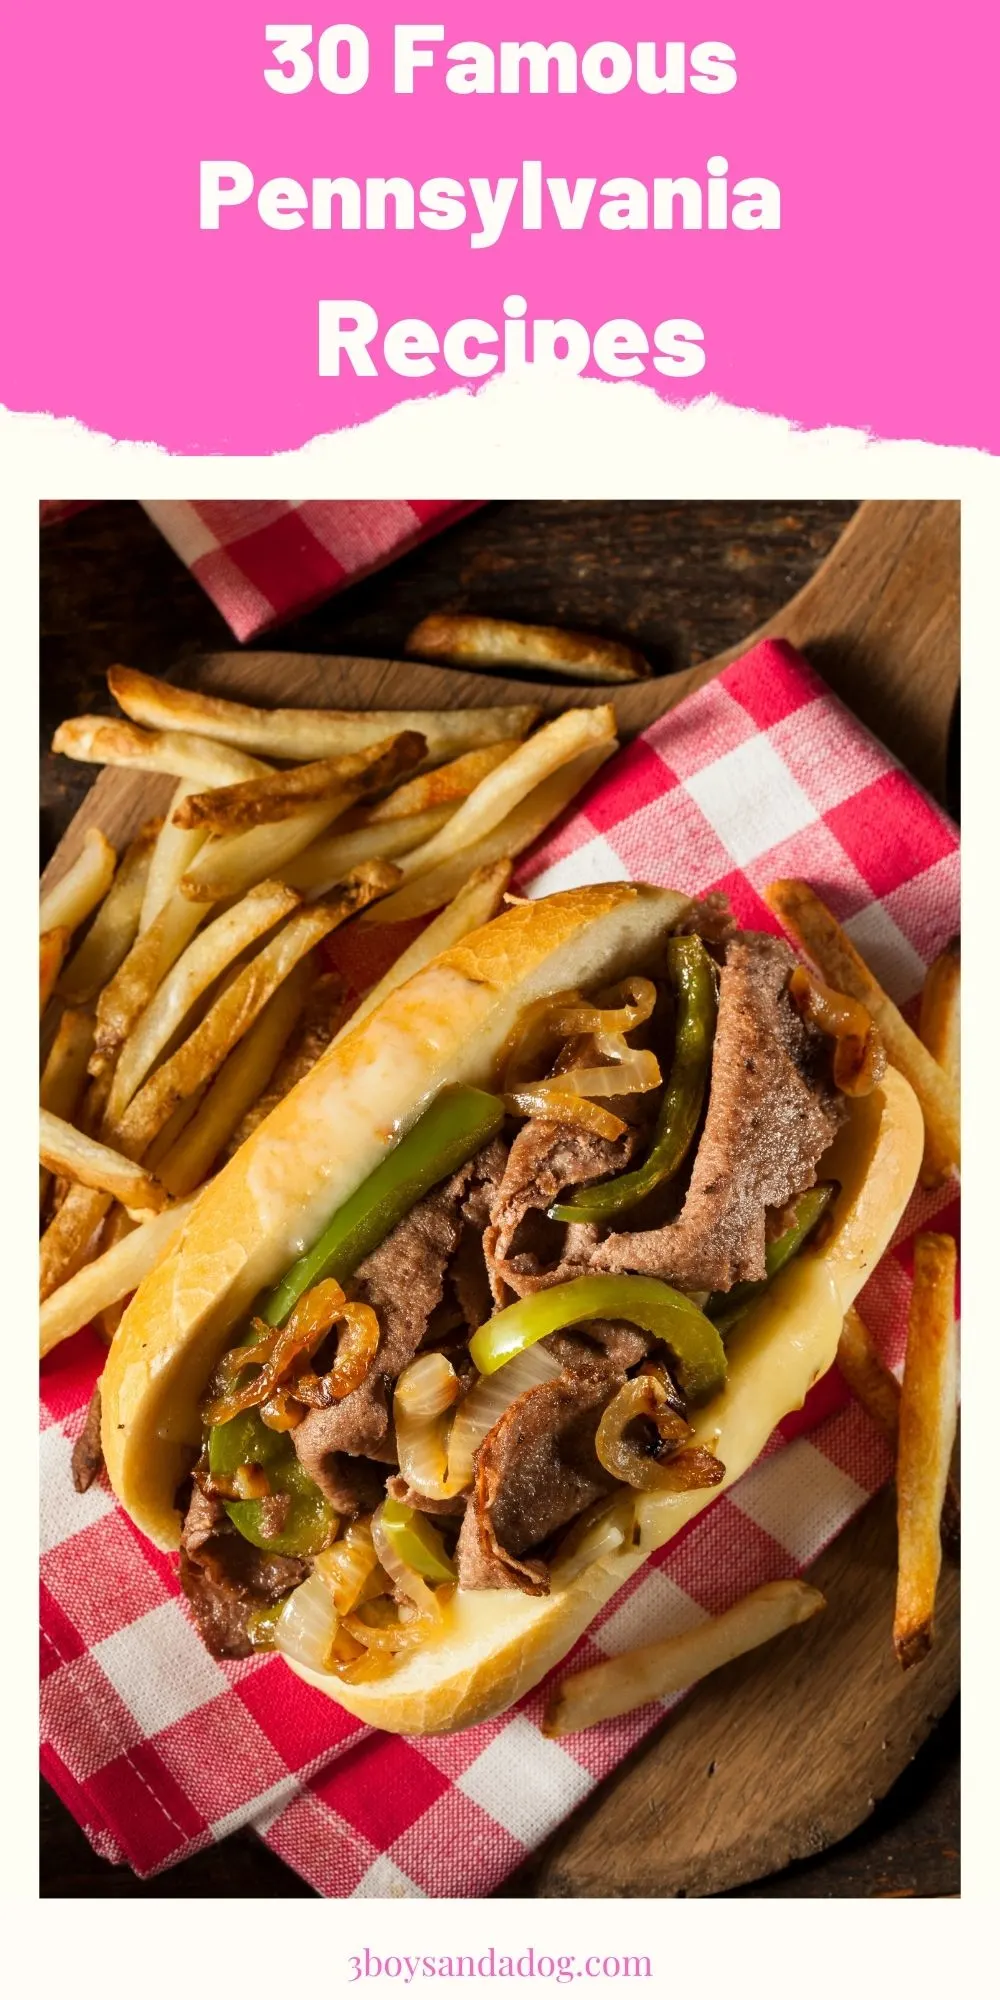 extra pin with an image of a Philly cheesesteak sandwich